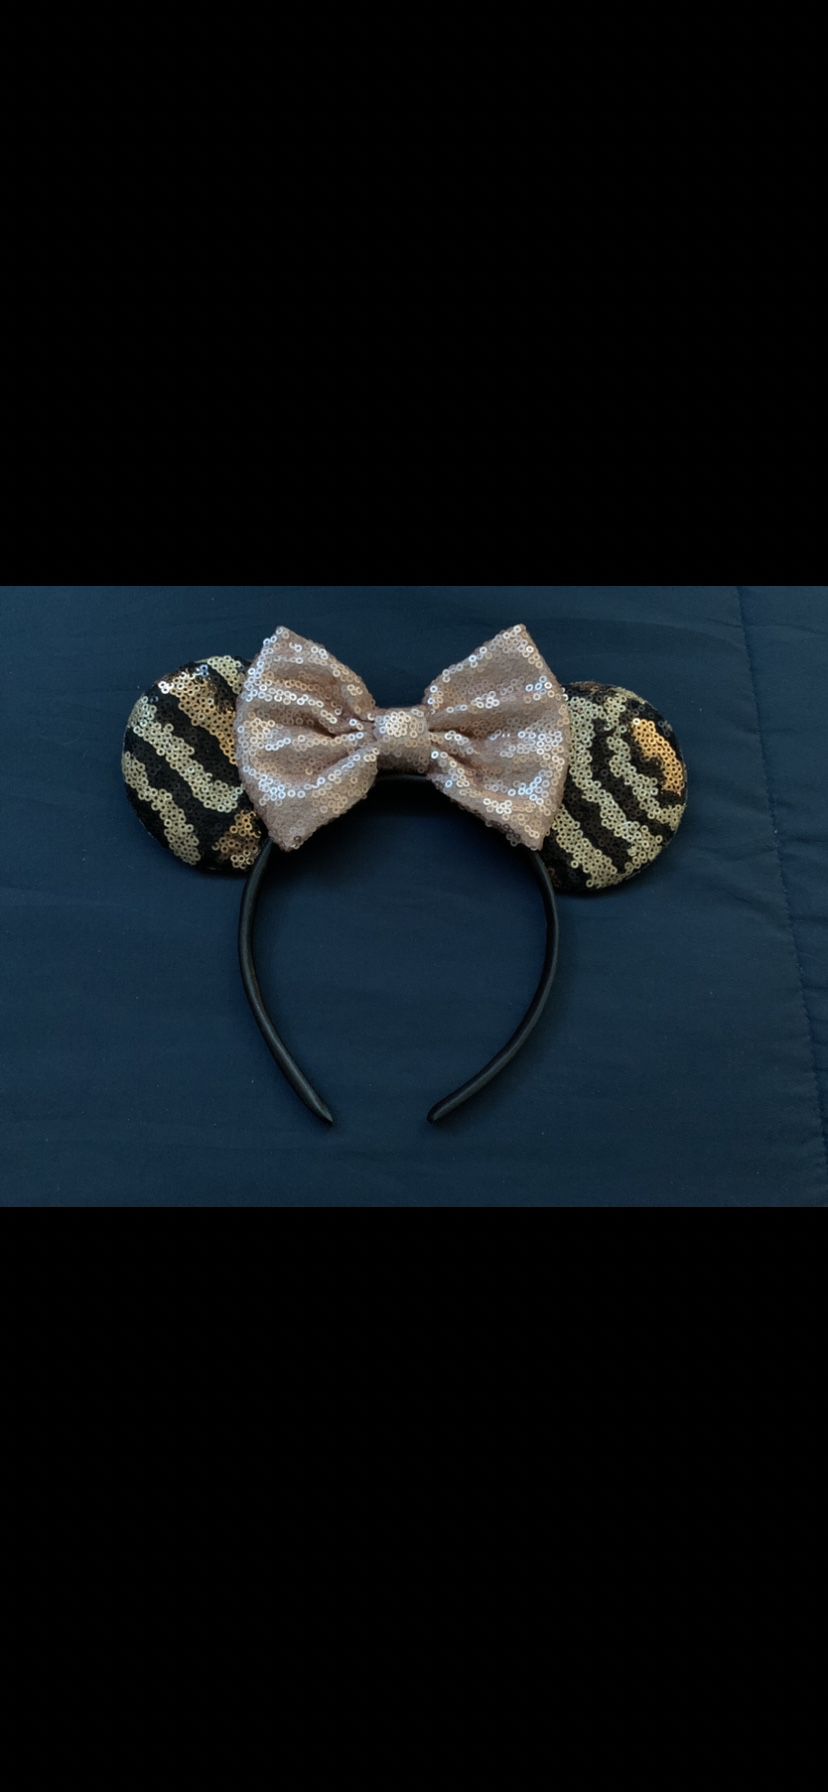  Leopard Print Mickey Mouse Ears *Brand New*